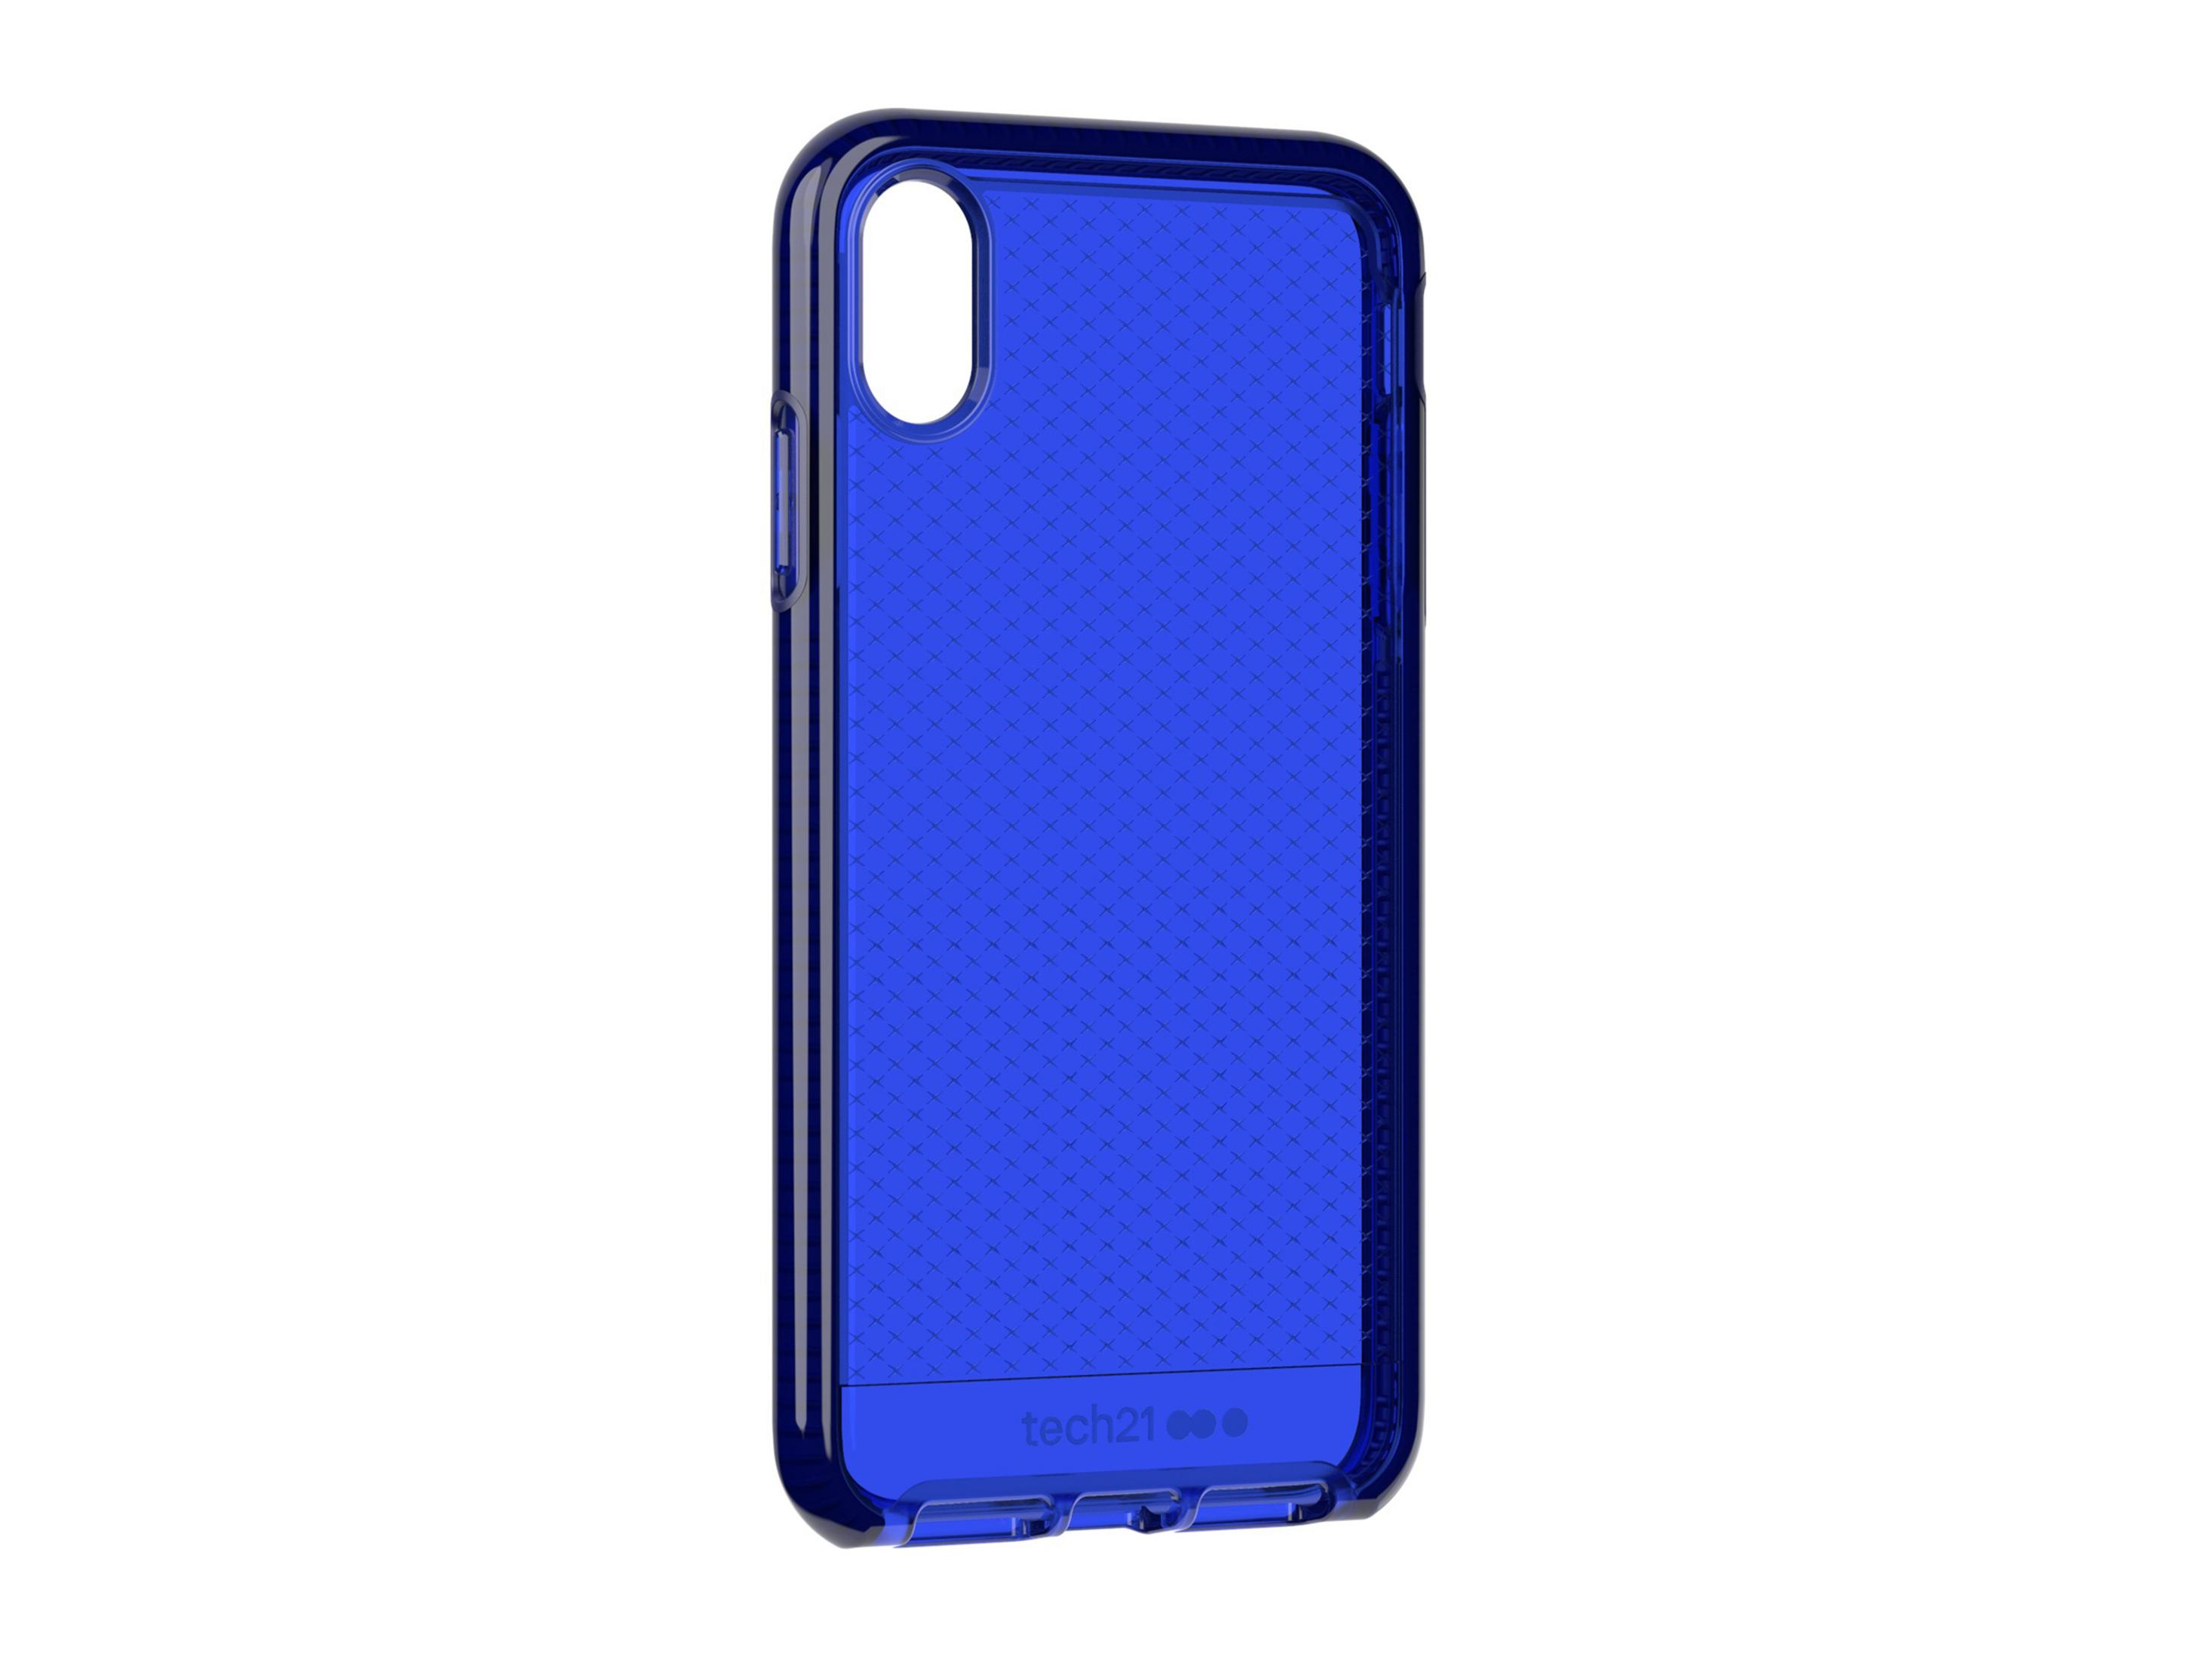 TECH21 MIDNIGHT IPHONE XS FOR Apple, CHECK Backcover, T21-6542 BLU, Blau Max, EVO iPhone MAX XS